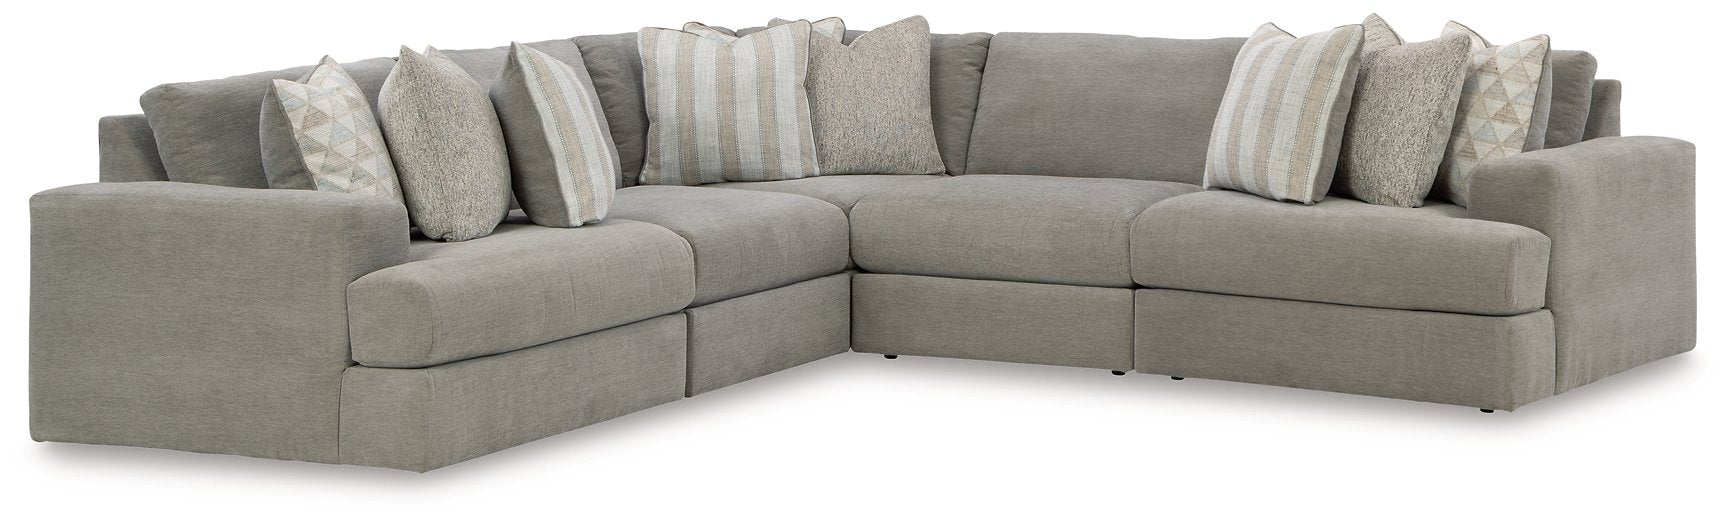 Avaliyah 5-Piece Sectional